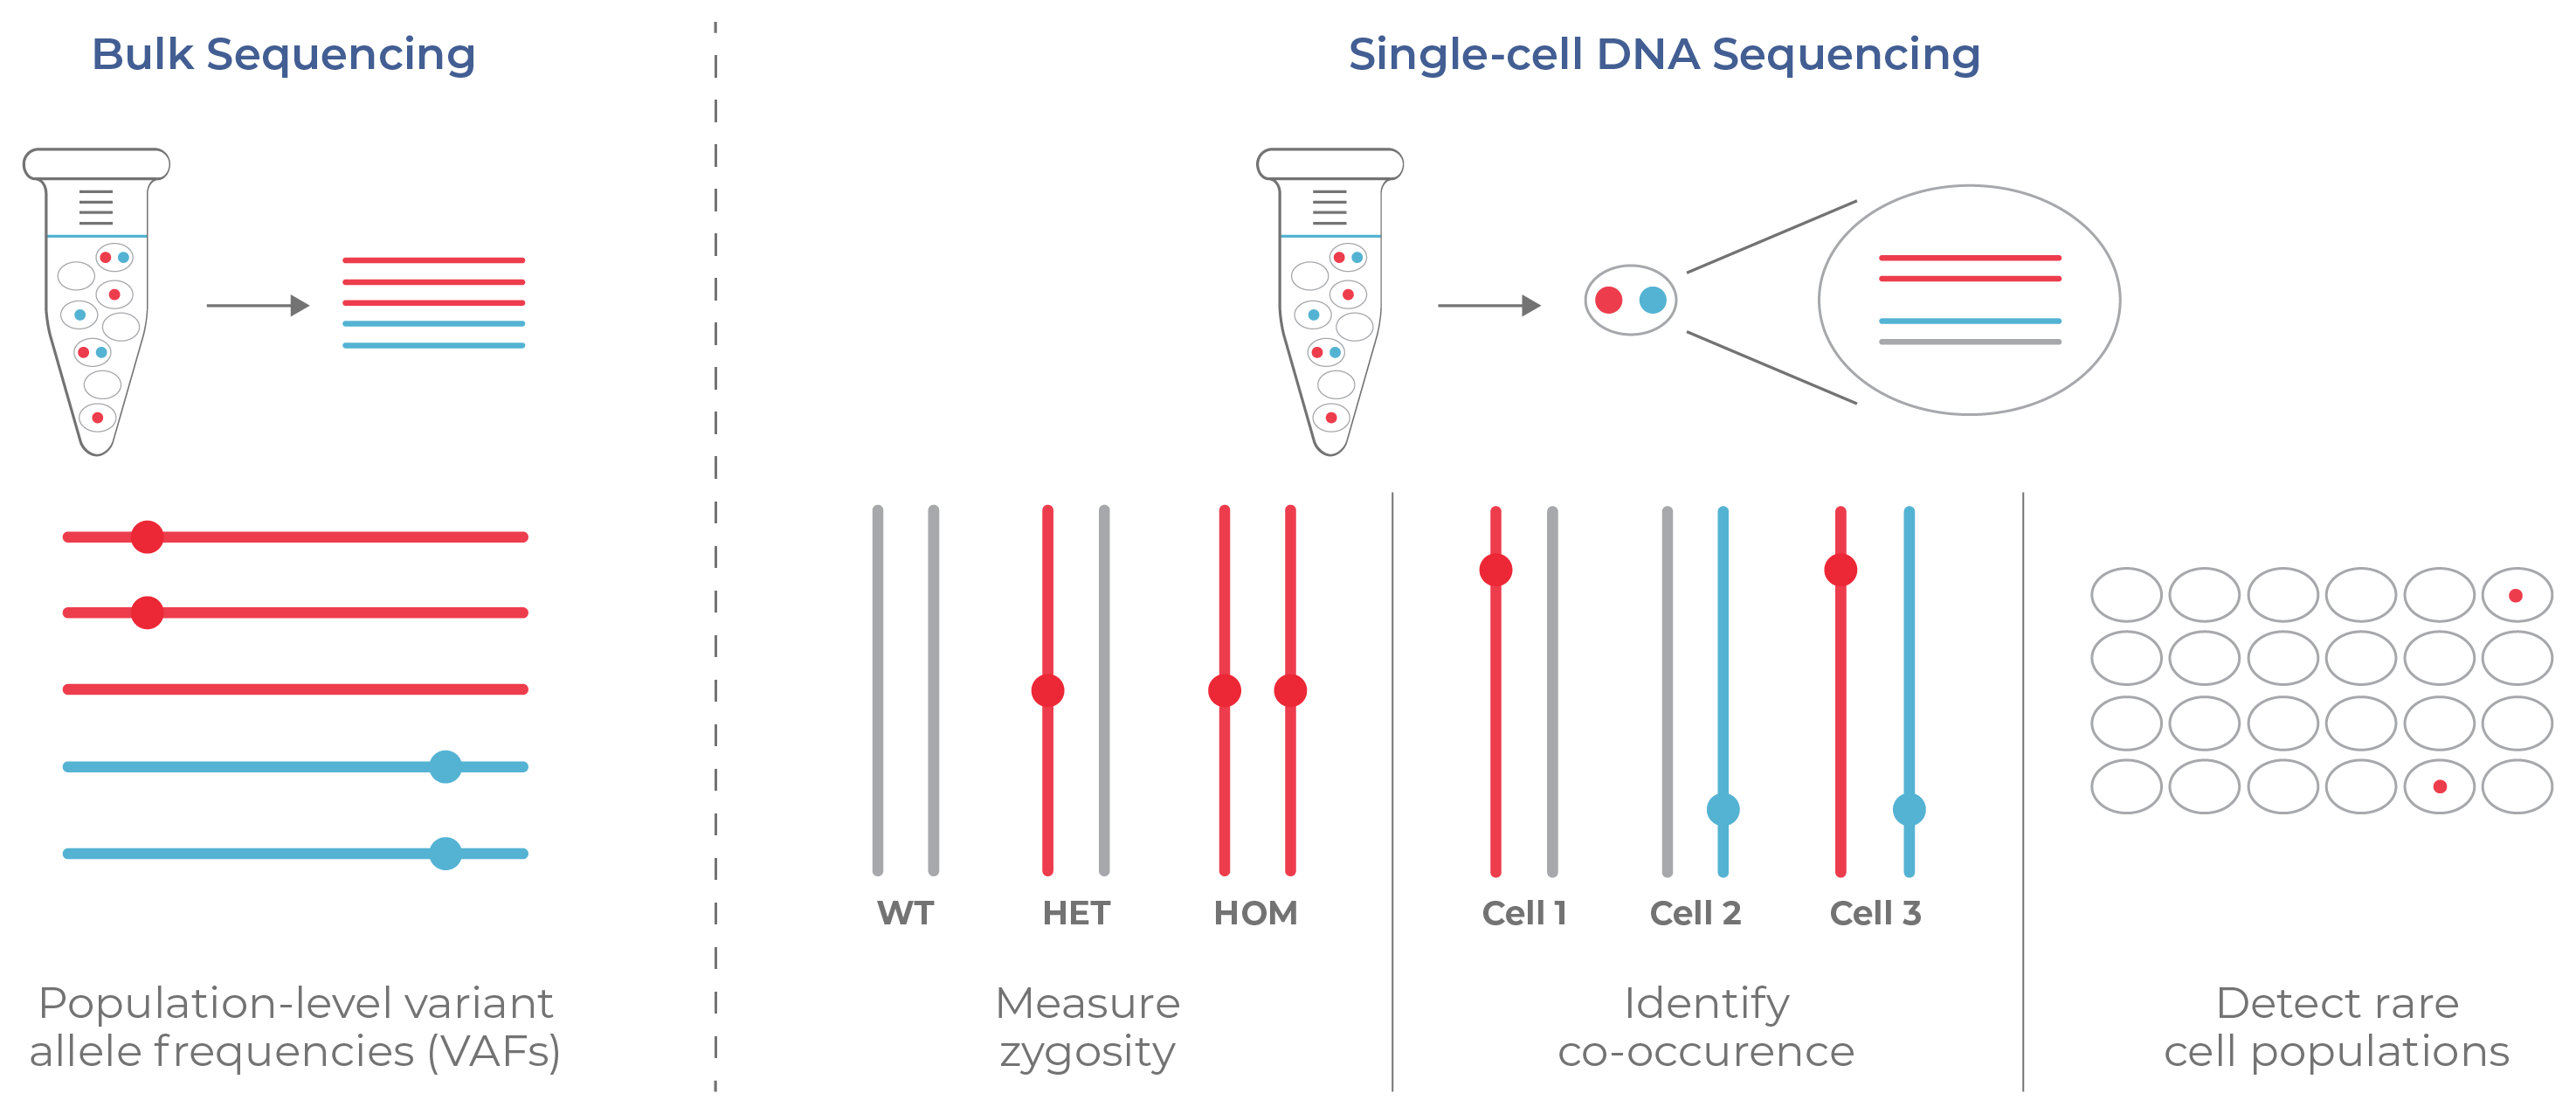 Figure 5. Information from bulk sequencing vs. single-cell DNA sequencing.